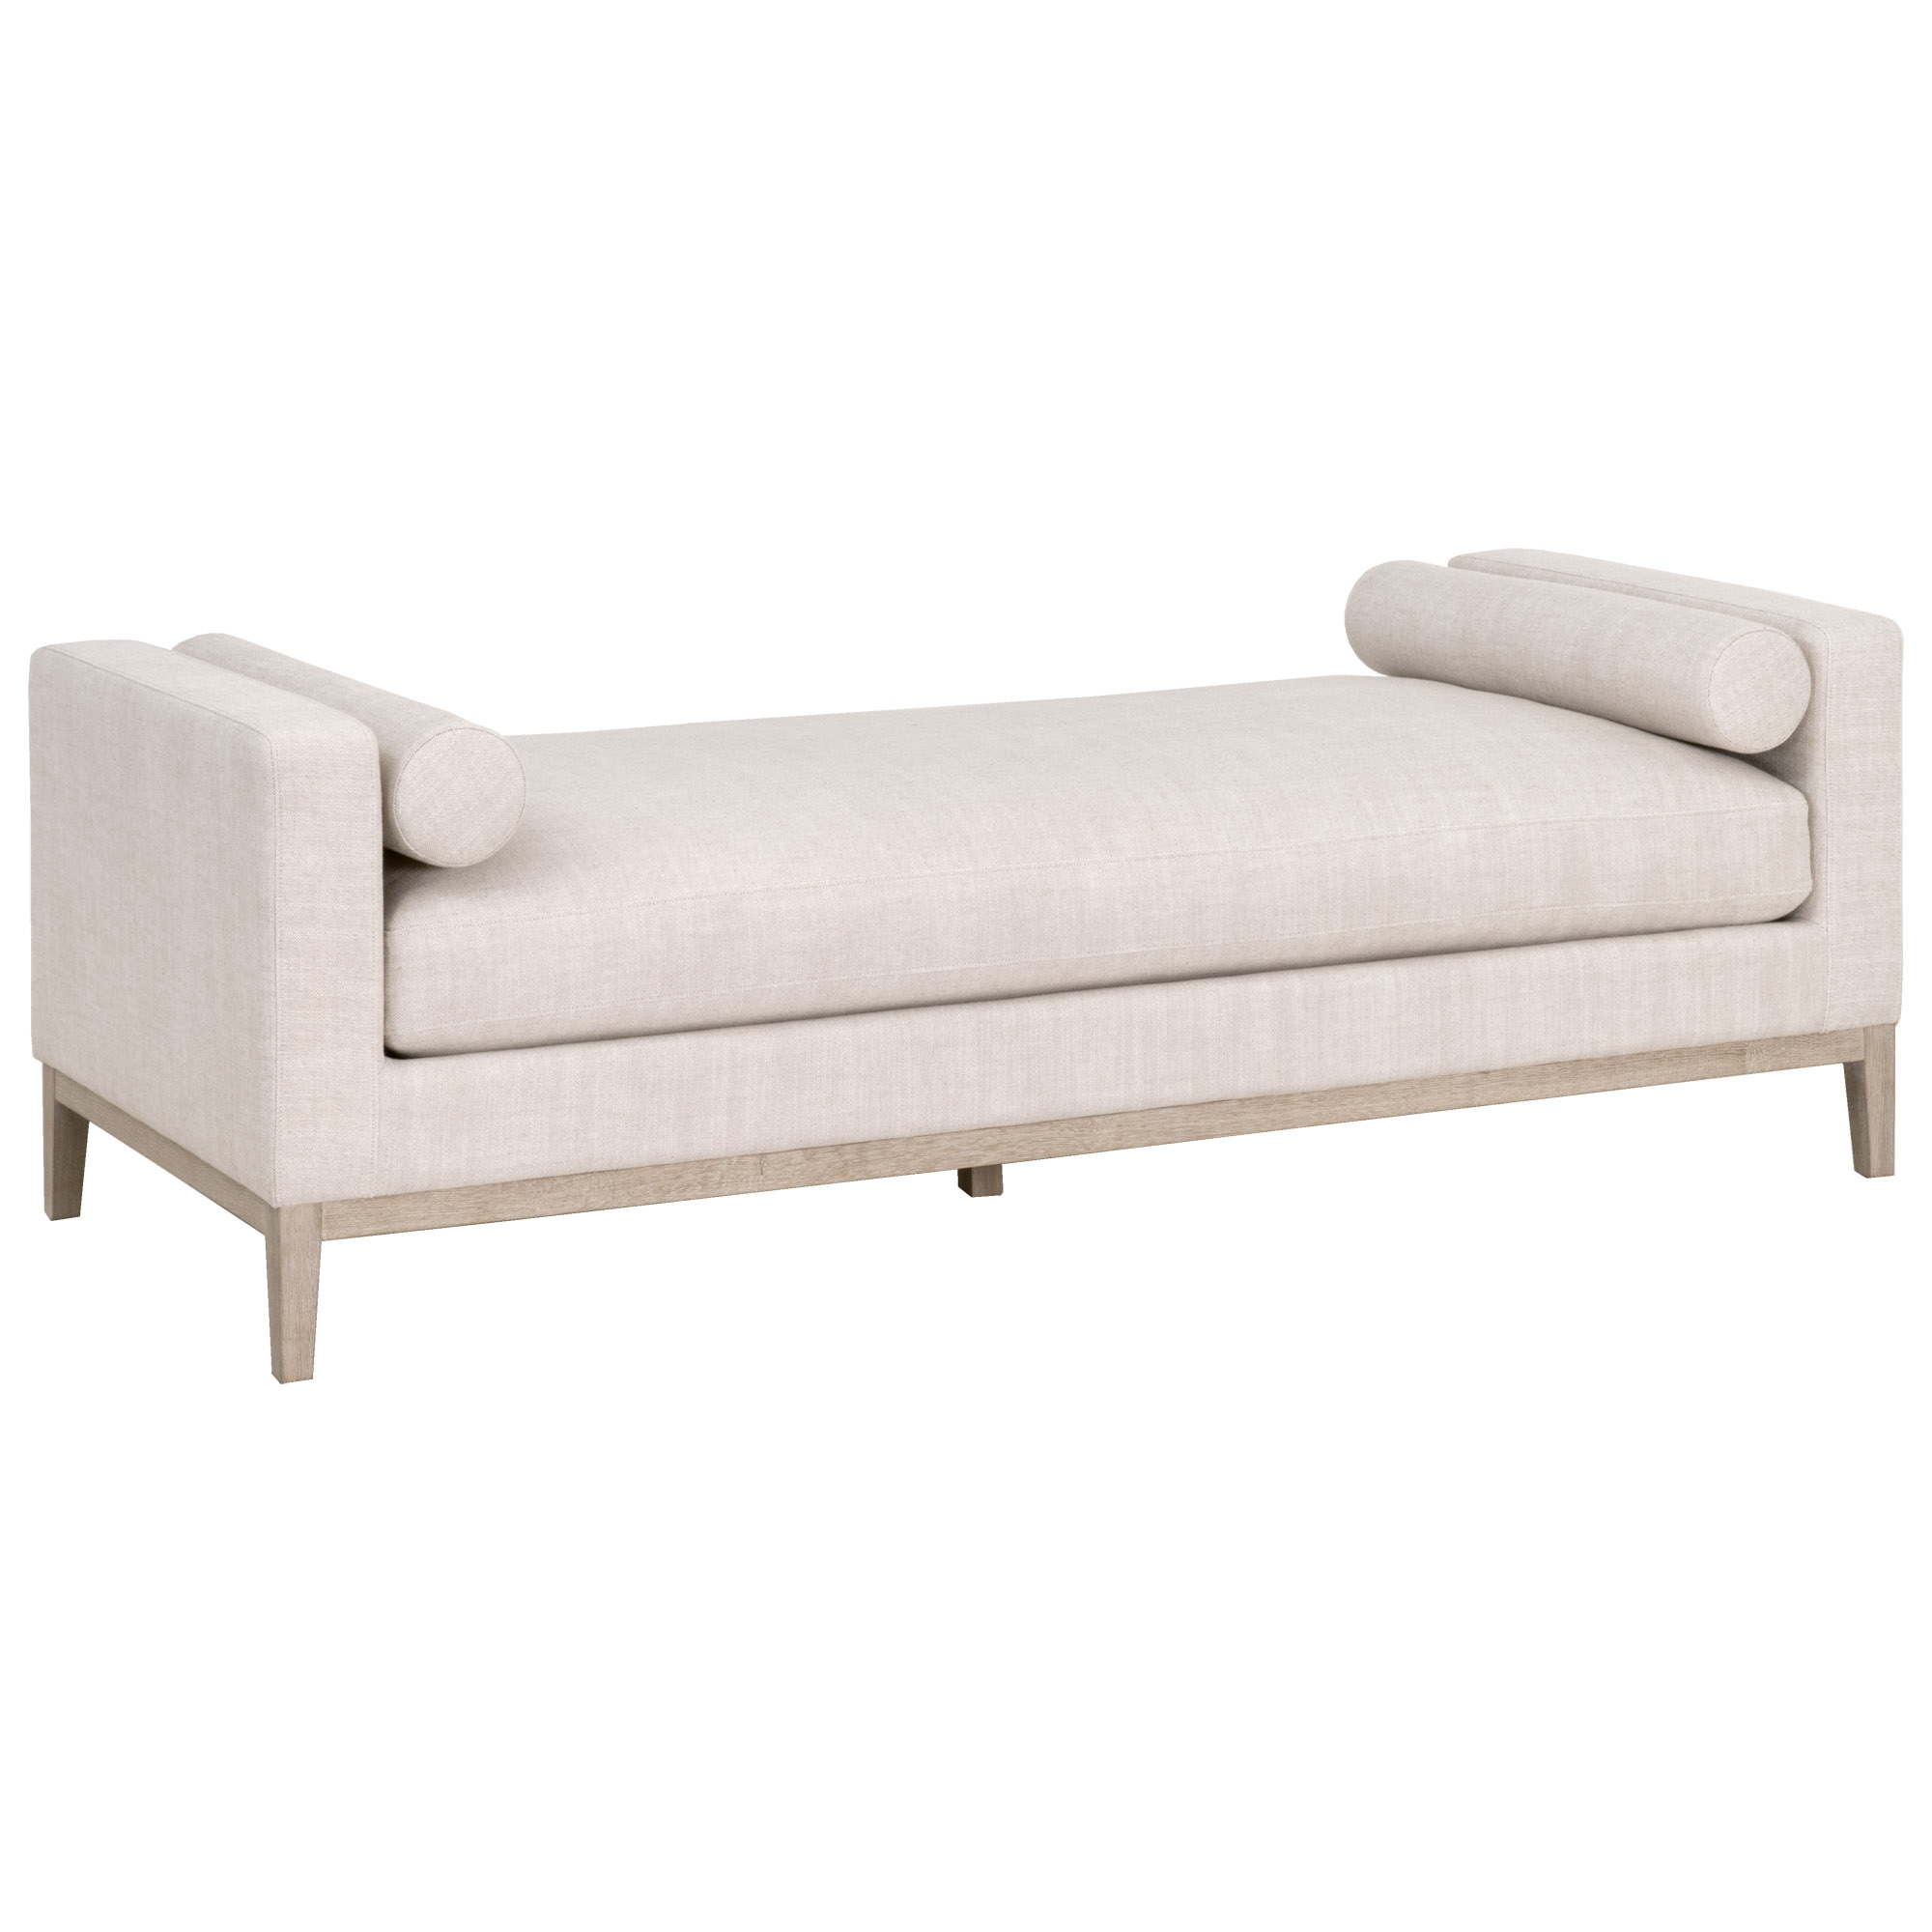 77.5"W x 33"D Keaton Daybed - Image 1